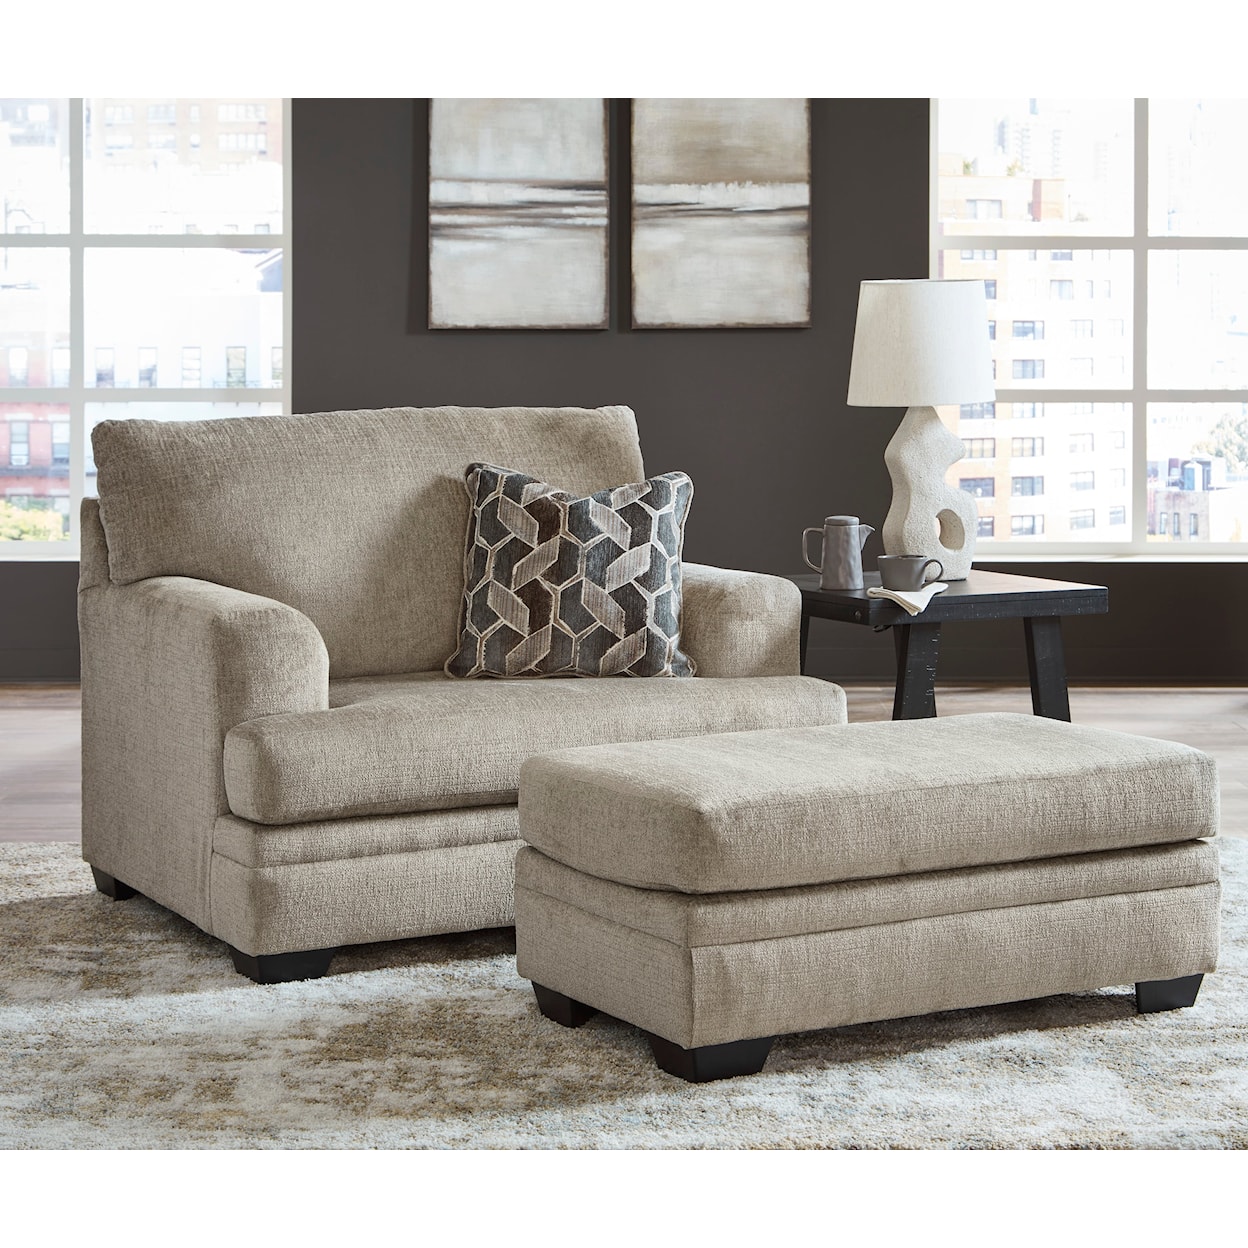 Signature Stonemeade Oversized Chair and Ottoman